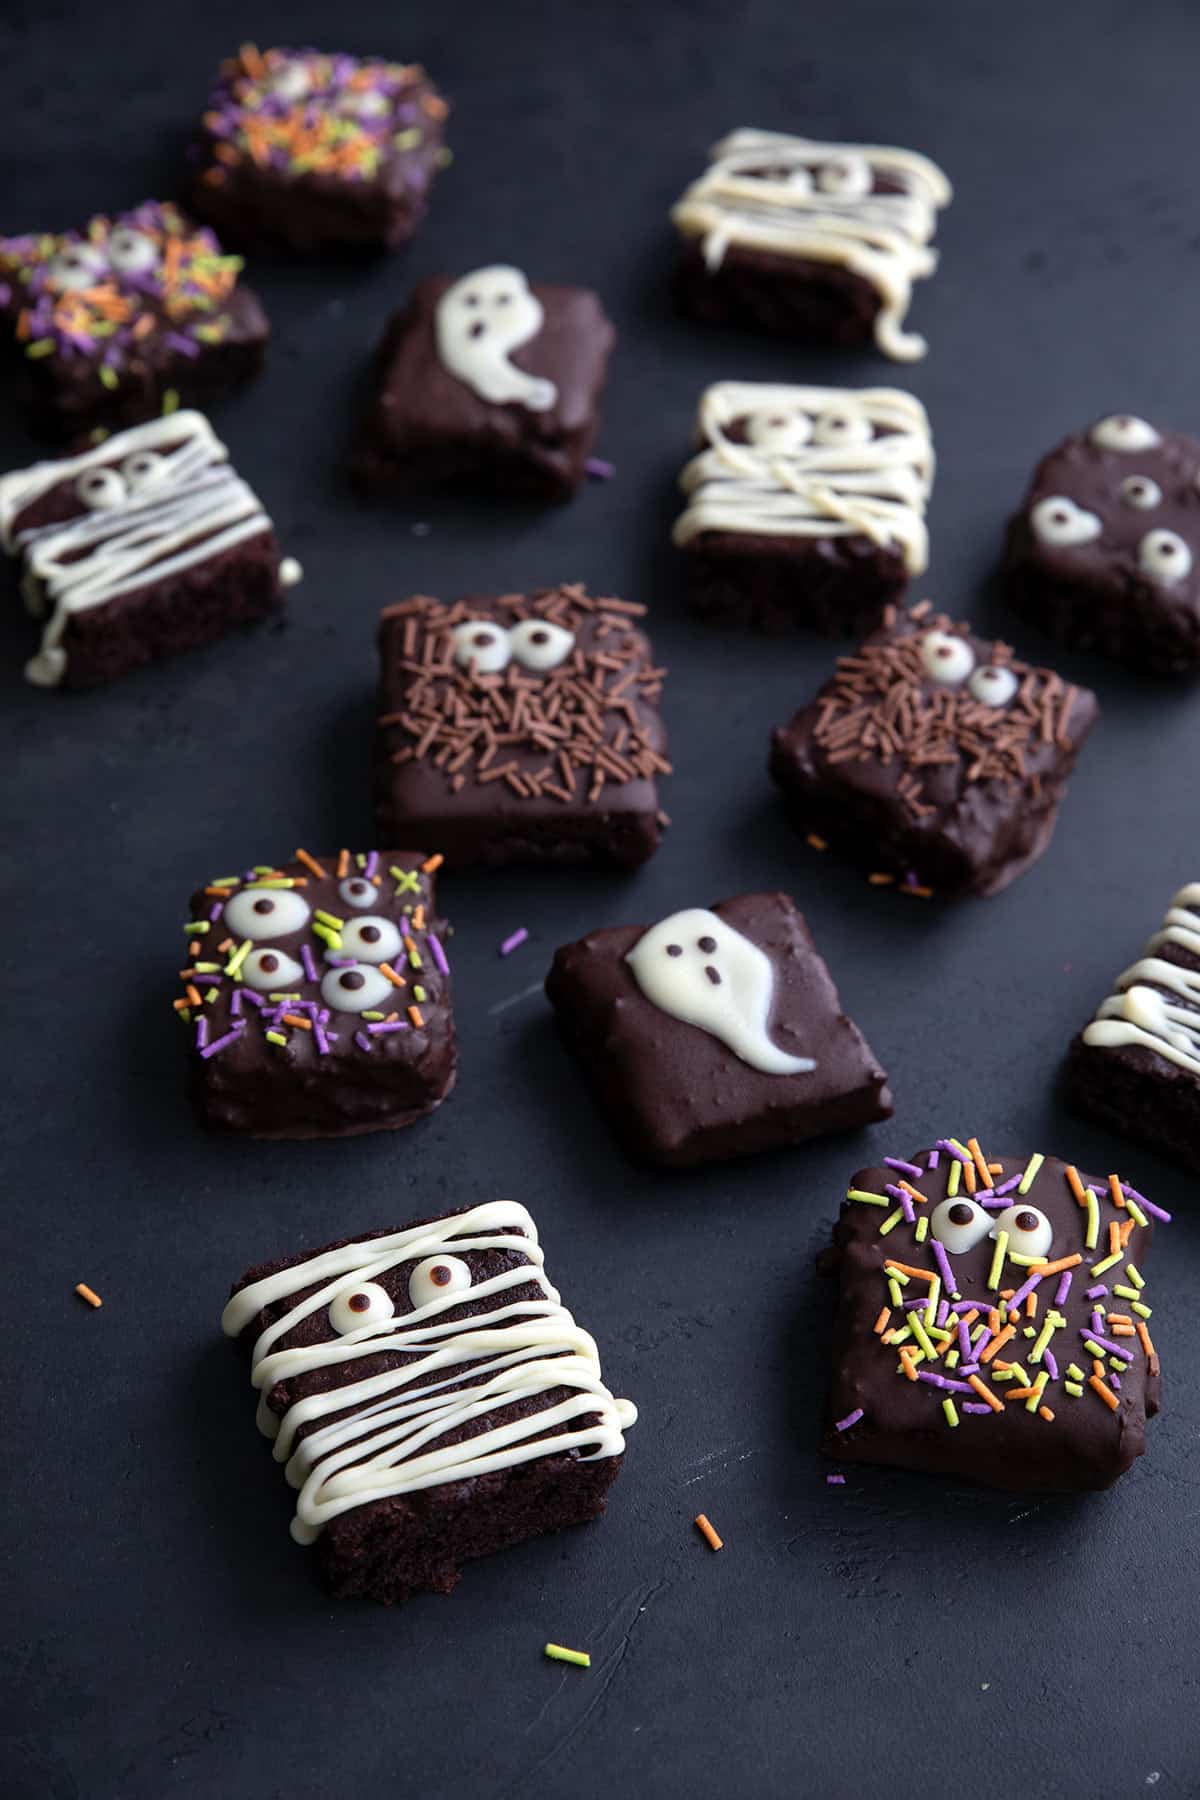 Keto Halloween Brownies spread out on a black tabletop.